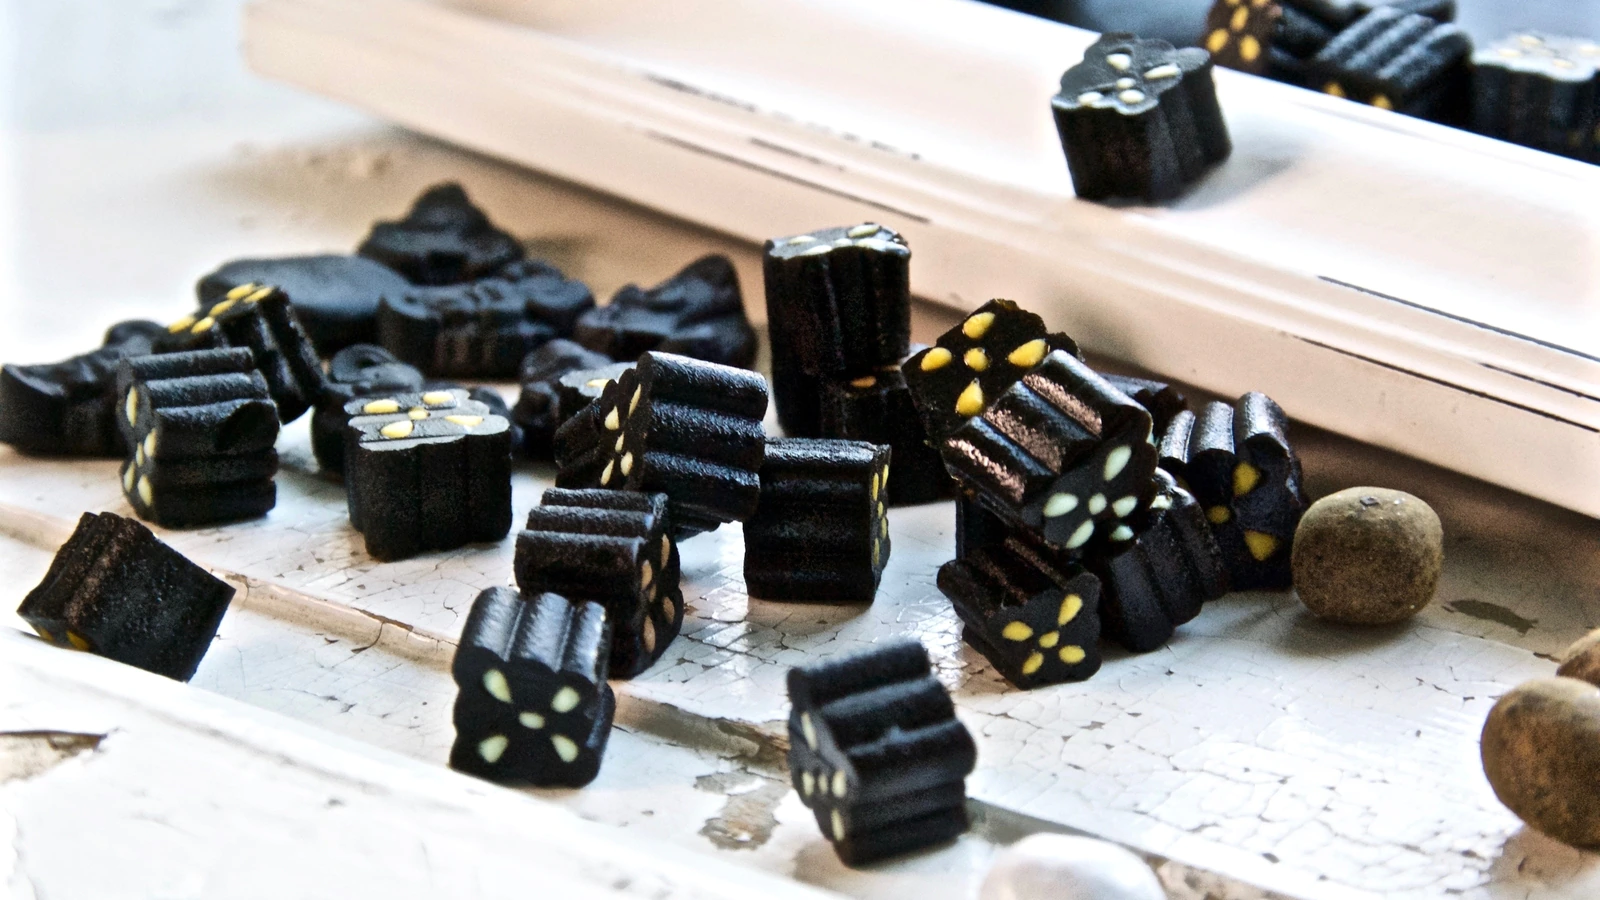 Study finds liquorice may help treat certain types of cancers